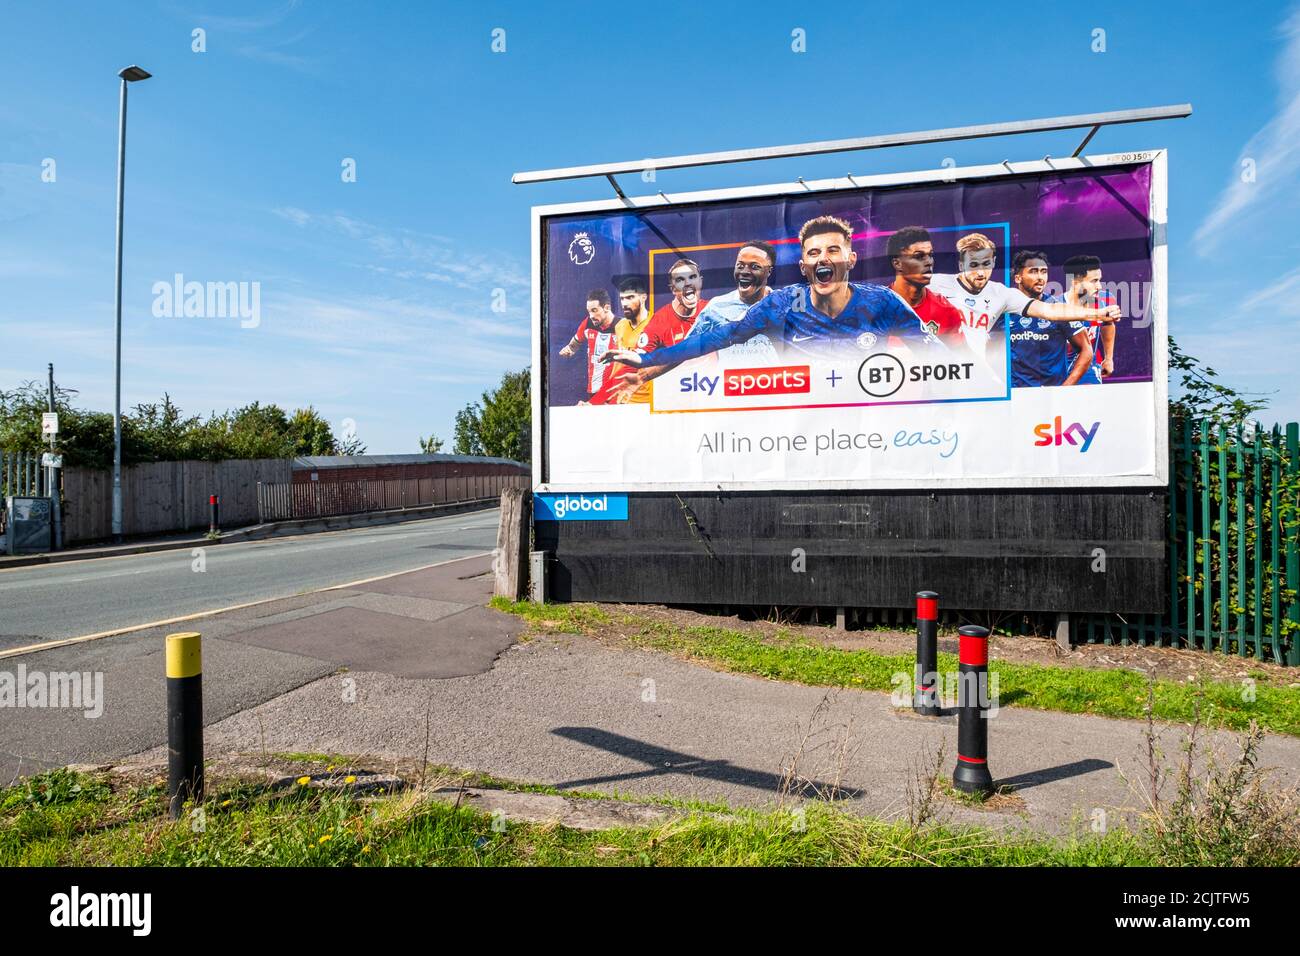 Sky Sports + BT Sport All in one place advert on billboard in Crewe Cheshire UK Stock Photo